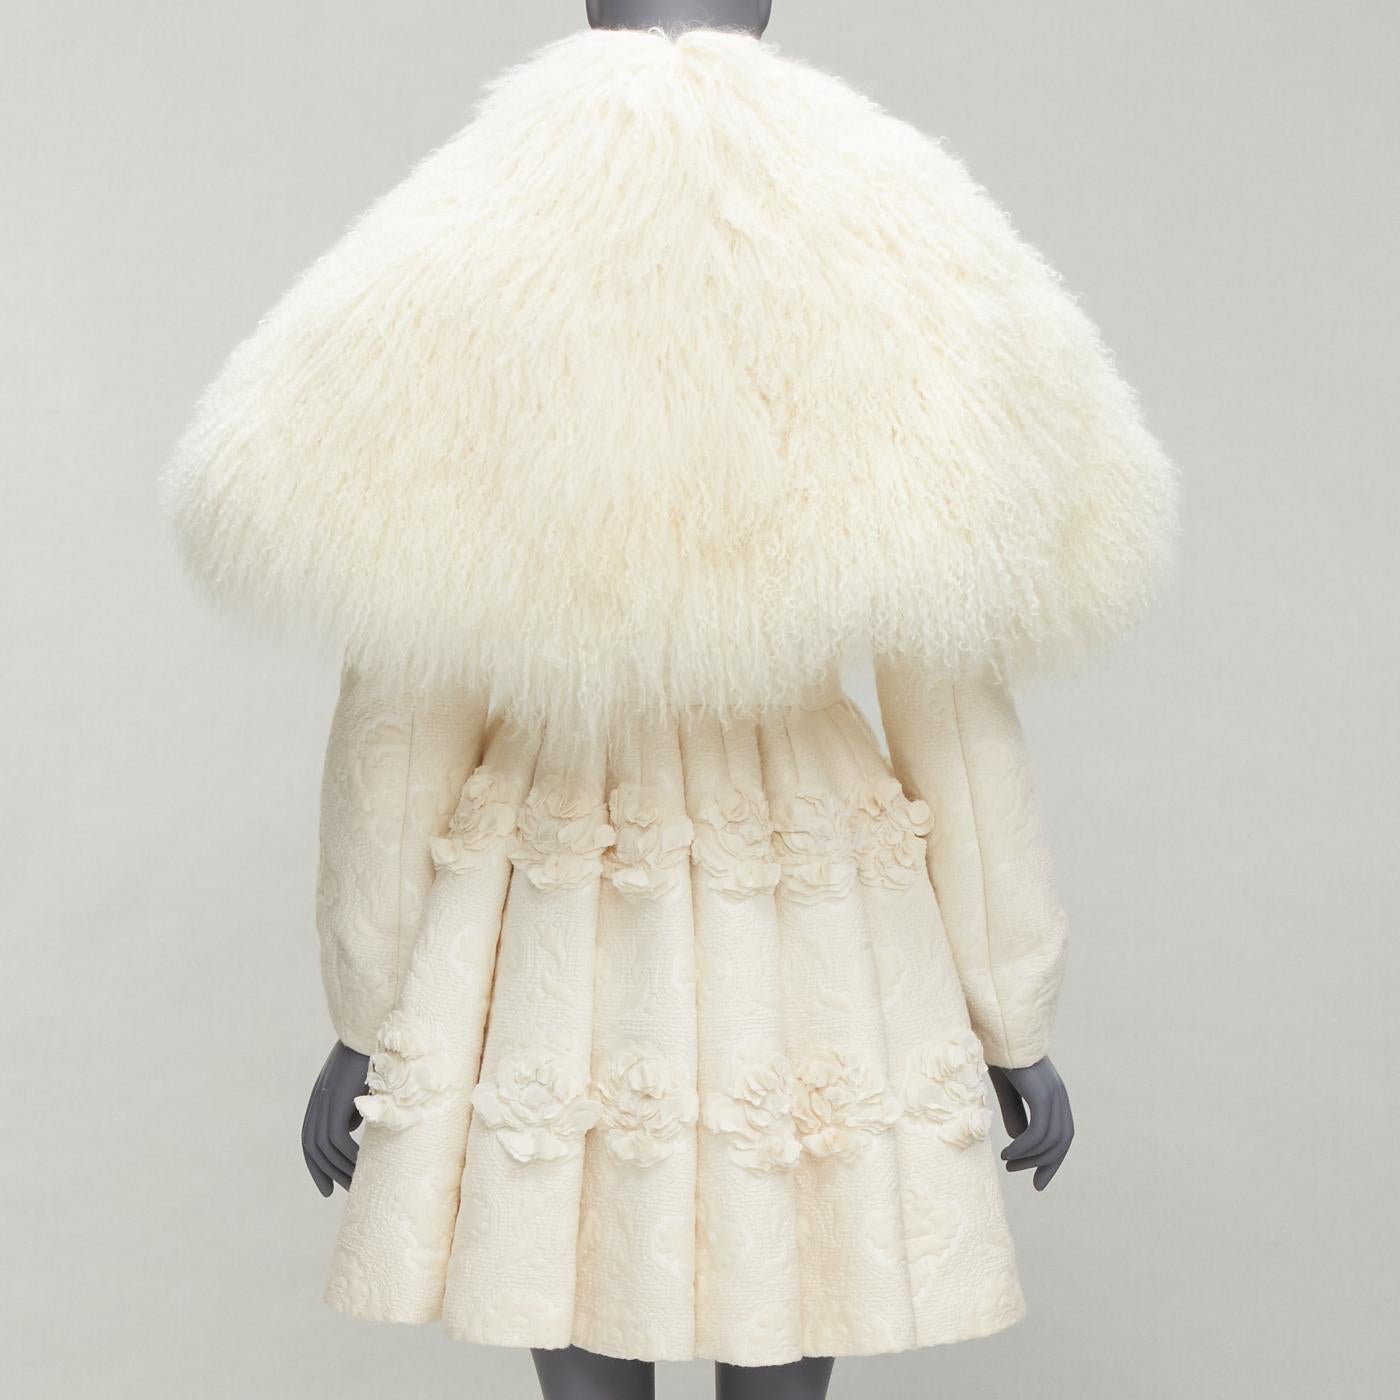 rare ALEXANDER MCQUEEN Sarah Burton 2012 Runway shearling coat dress IT38 XS In Excellent Condition For Sale In Hong Kong, NT